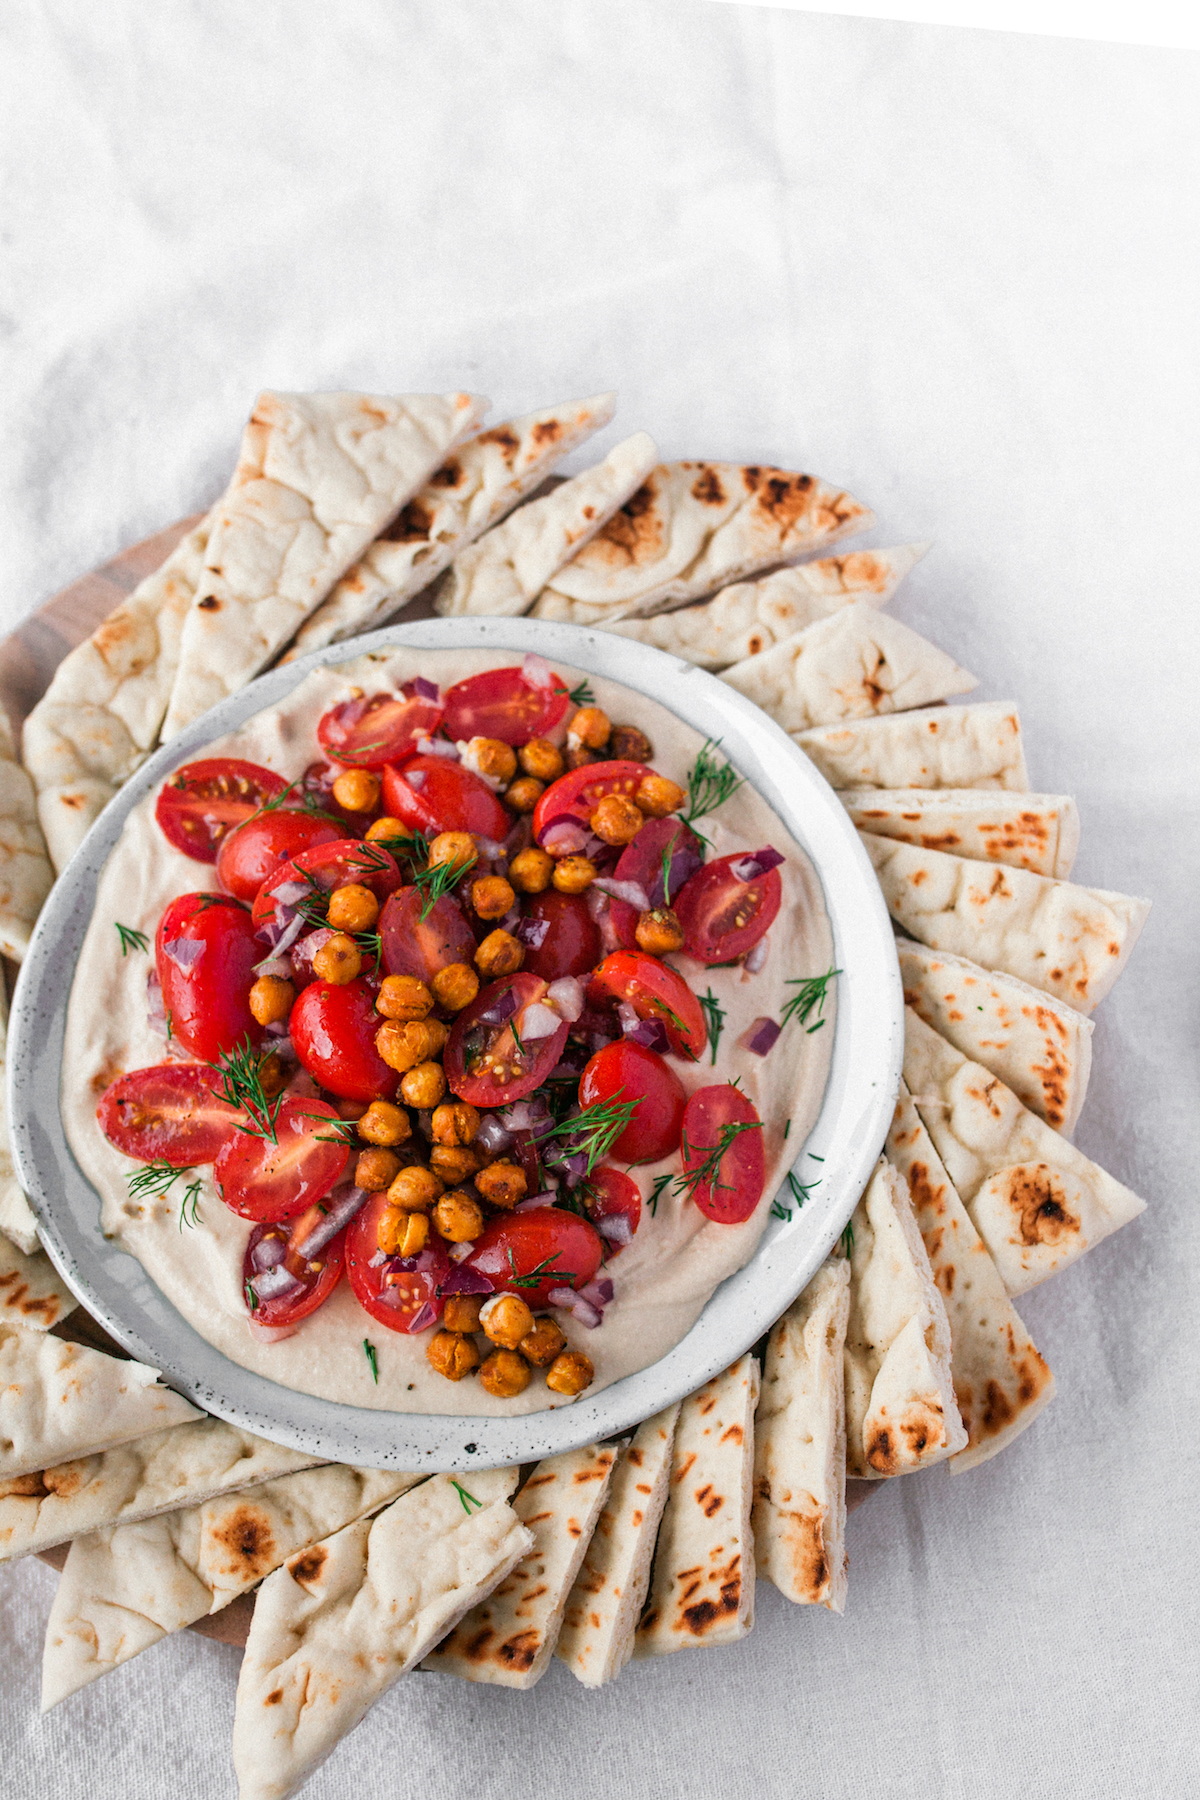 Easy hummus party platter for any season - whip it up in about an hour ...